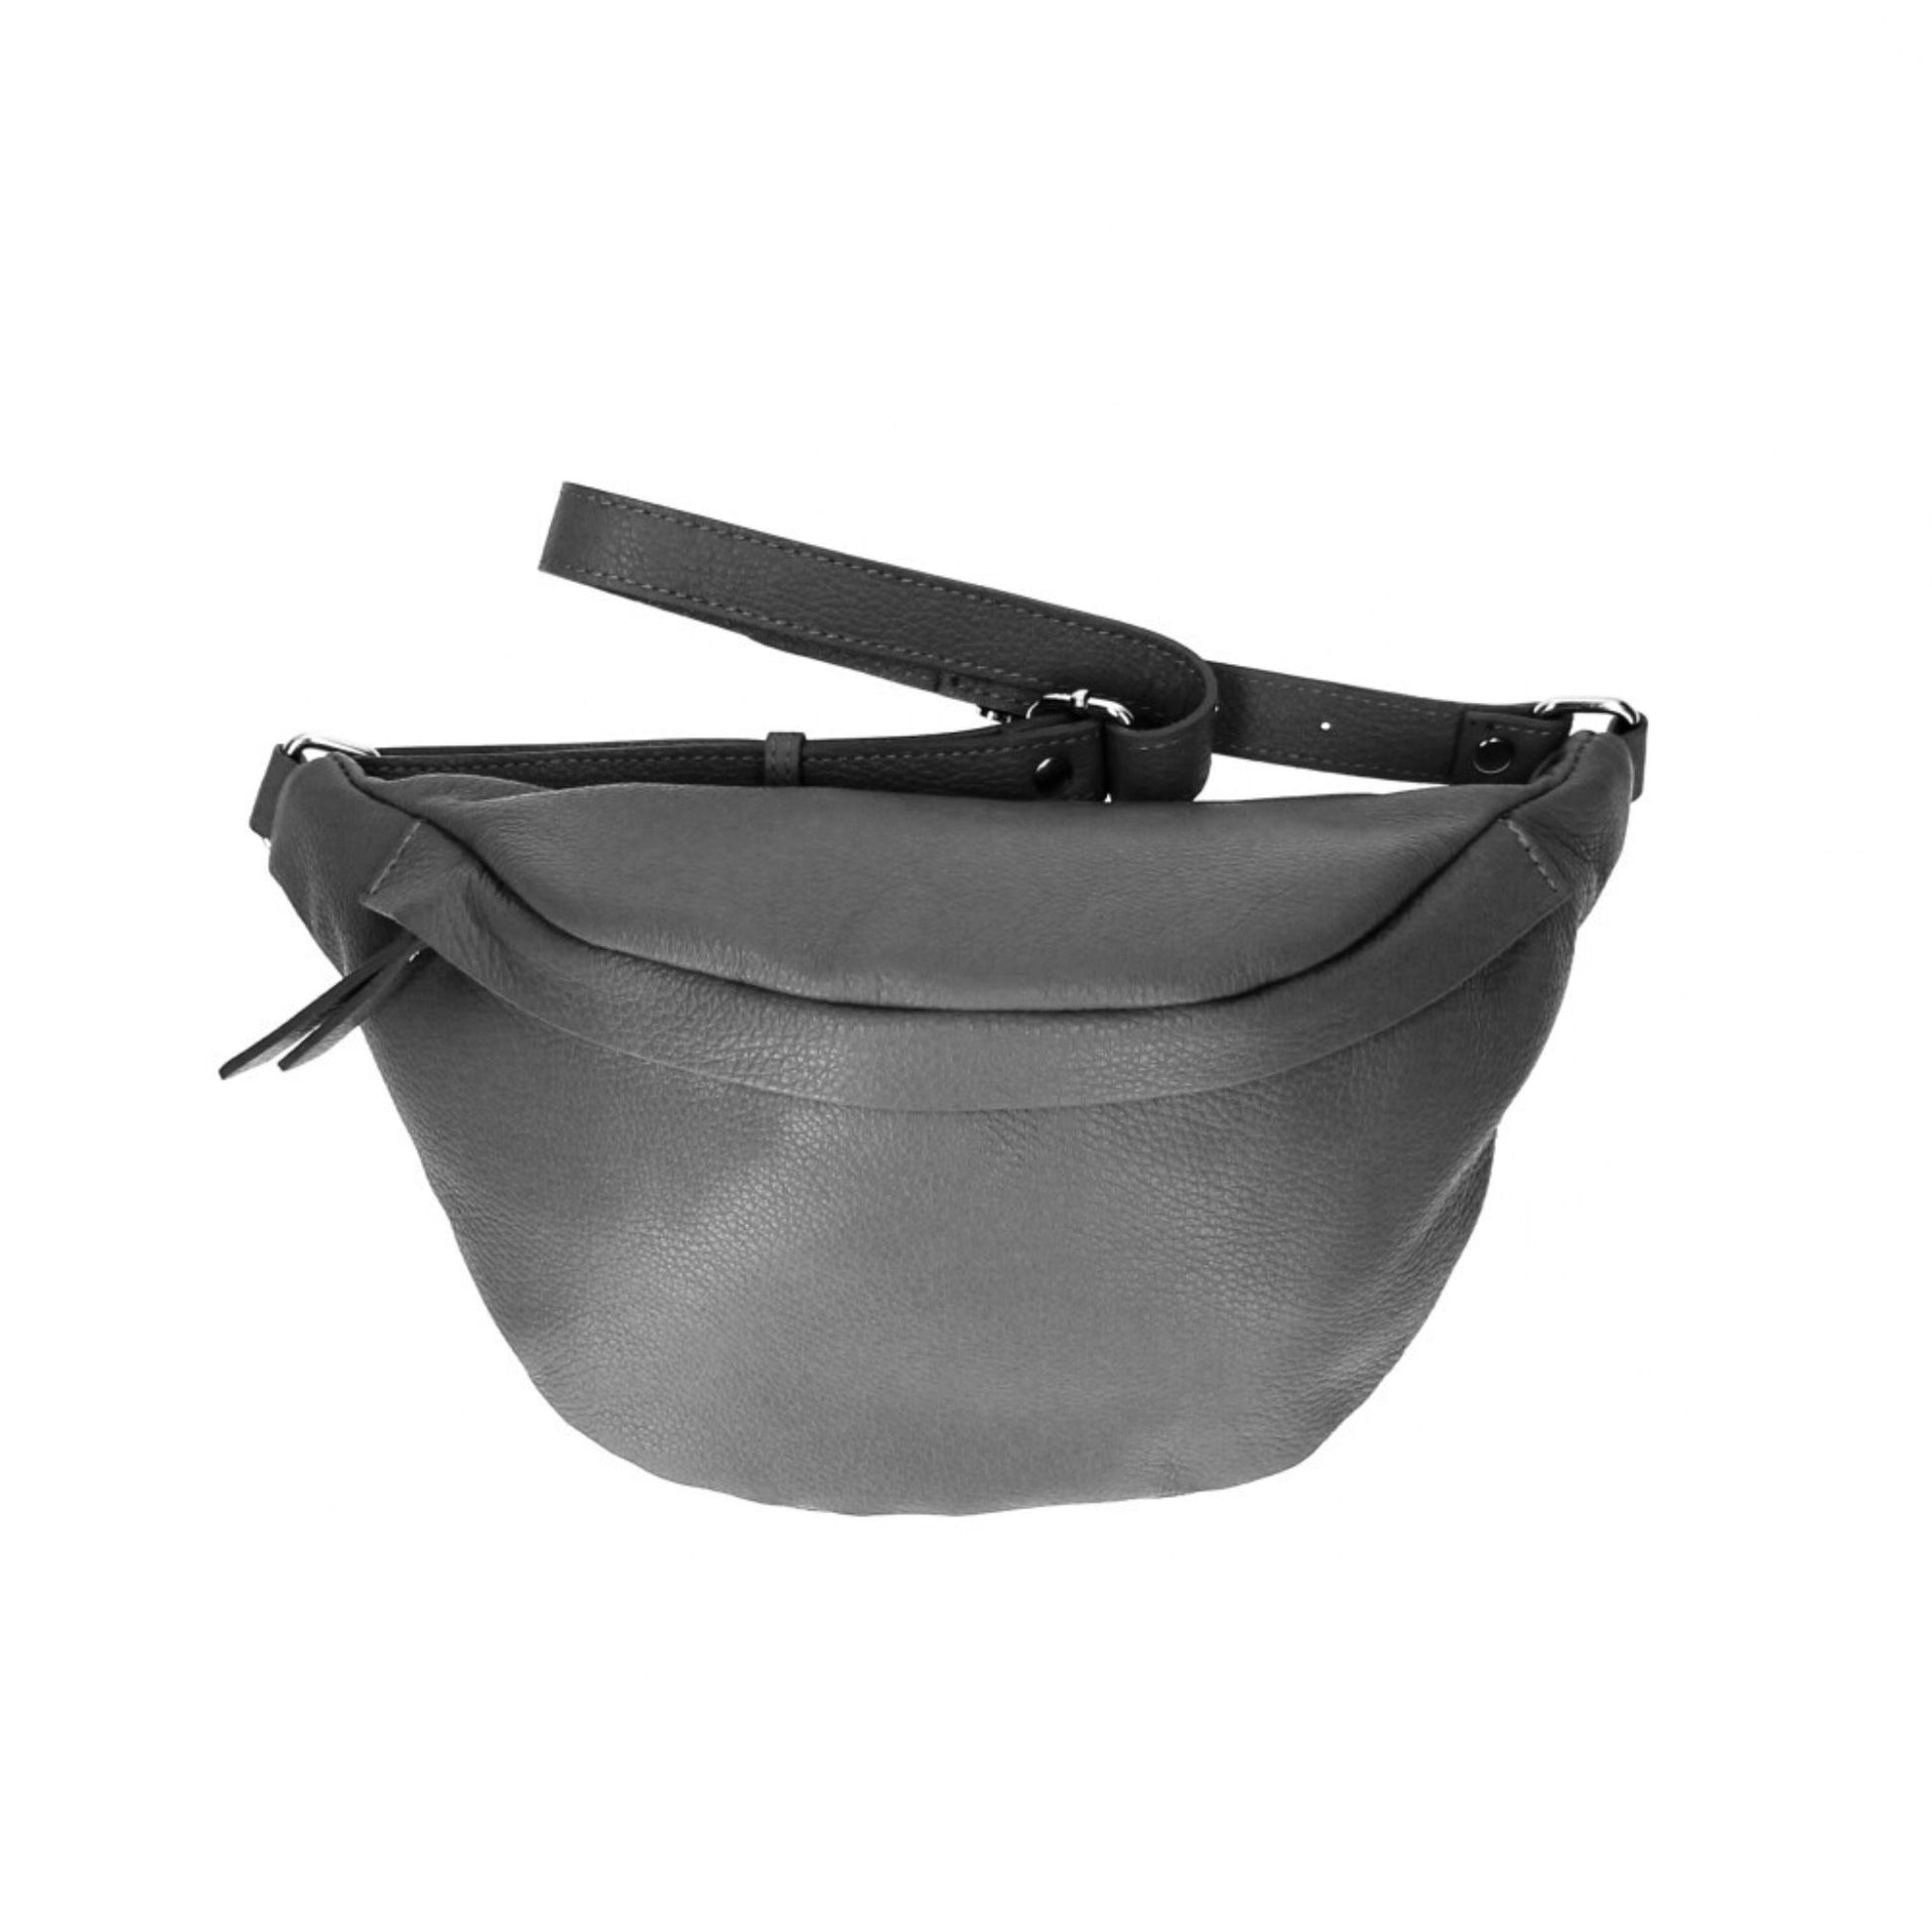 Fashionable bumbag in classic gray leather, perfect for everyday use.